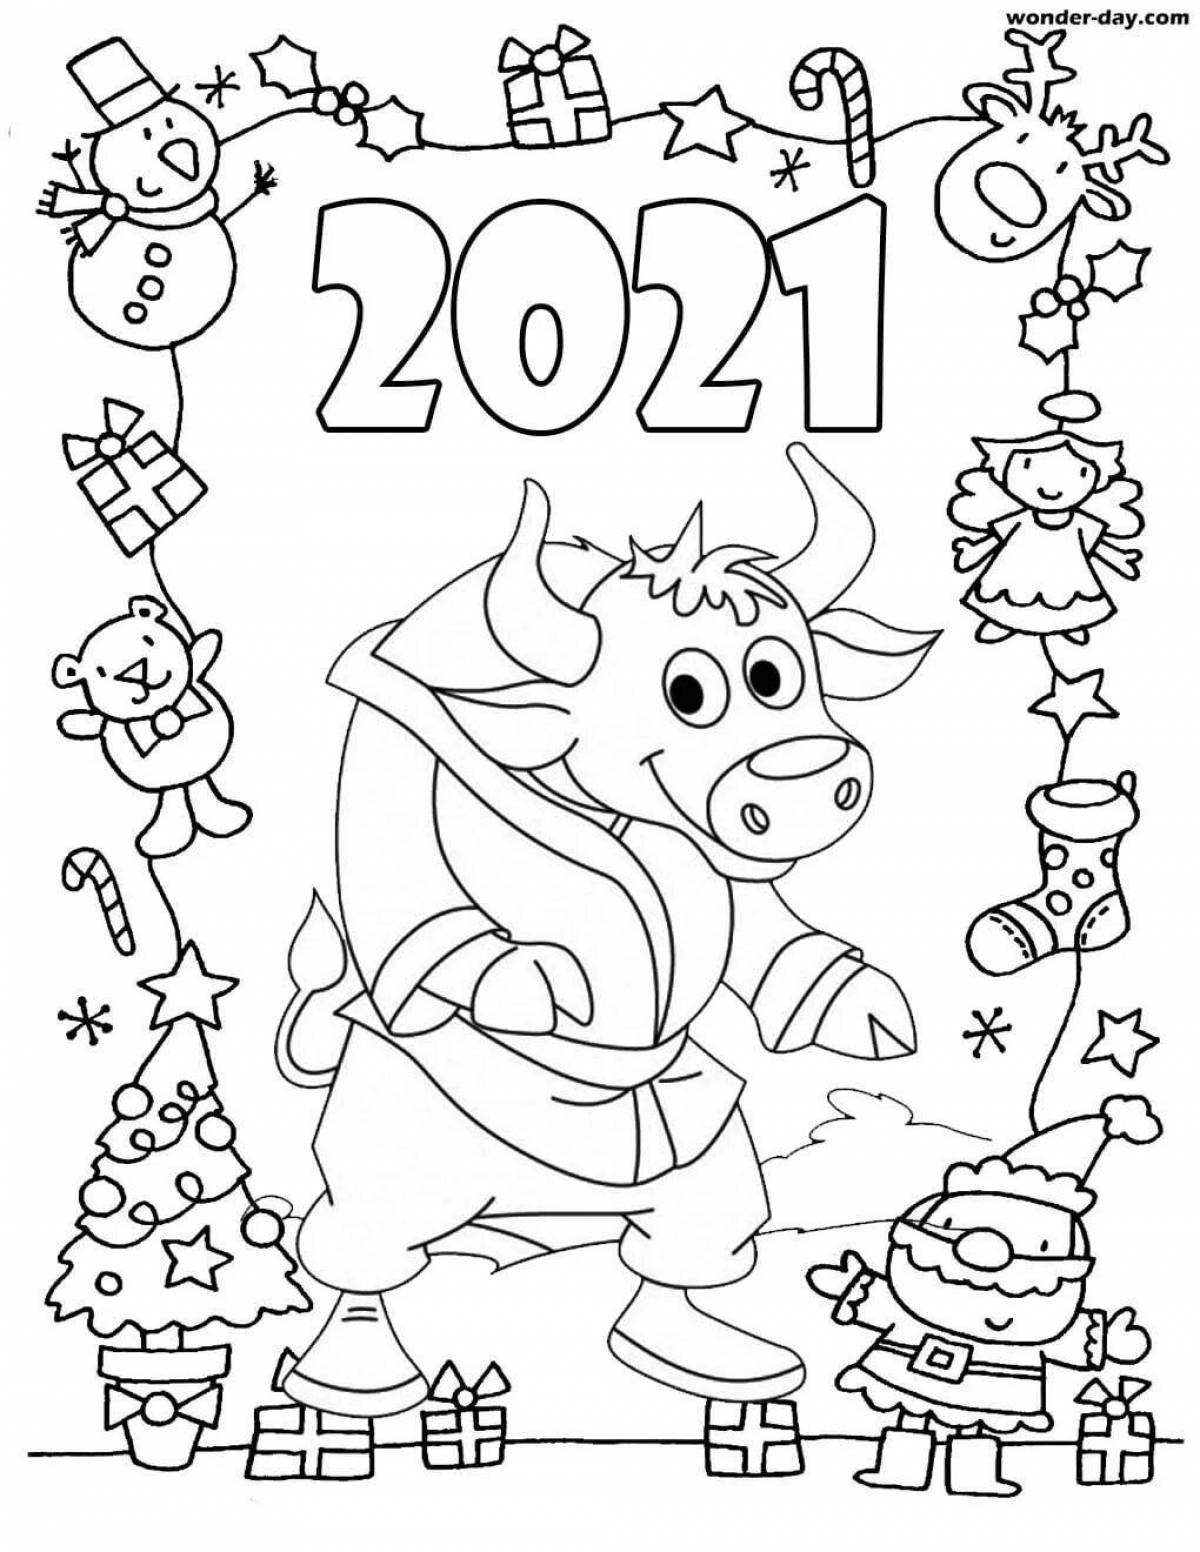 Coloring book alluring symbol of the year